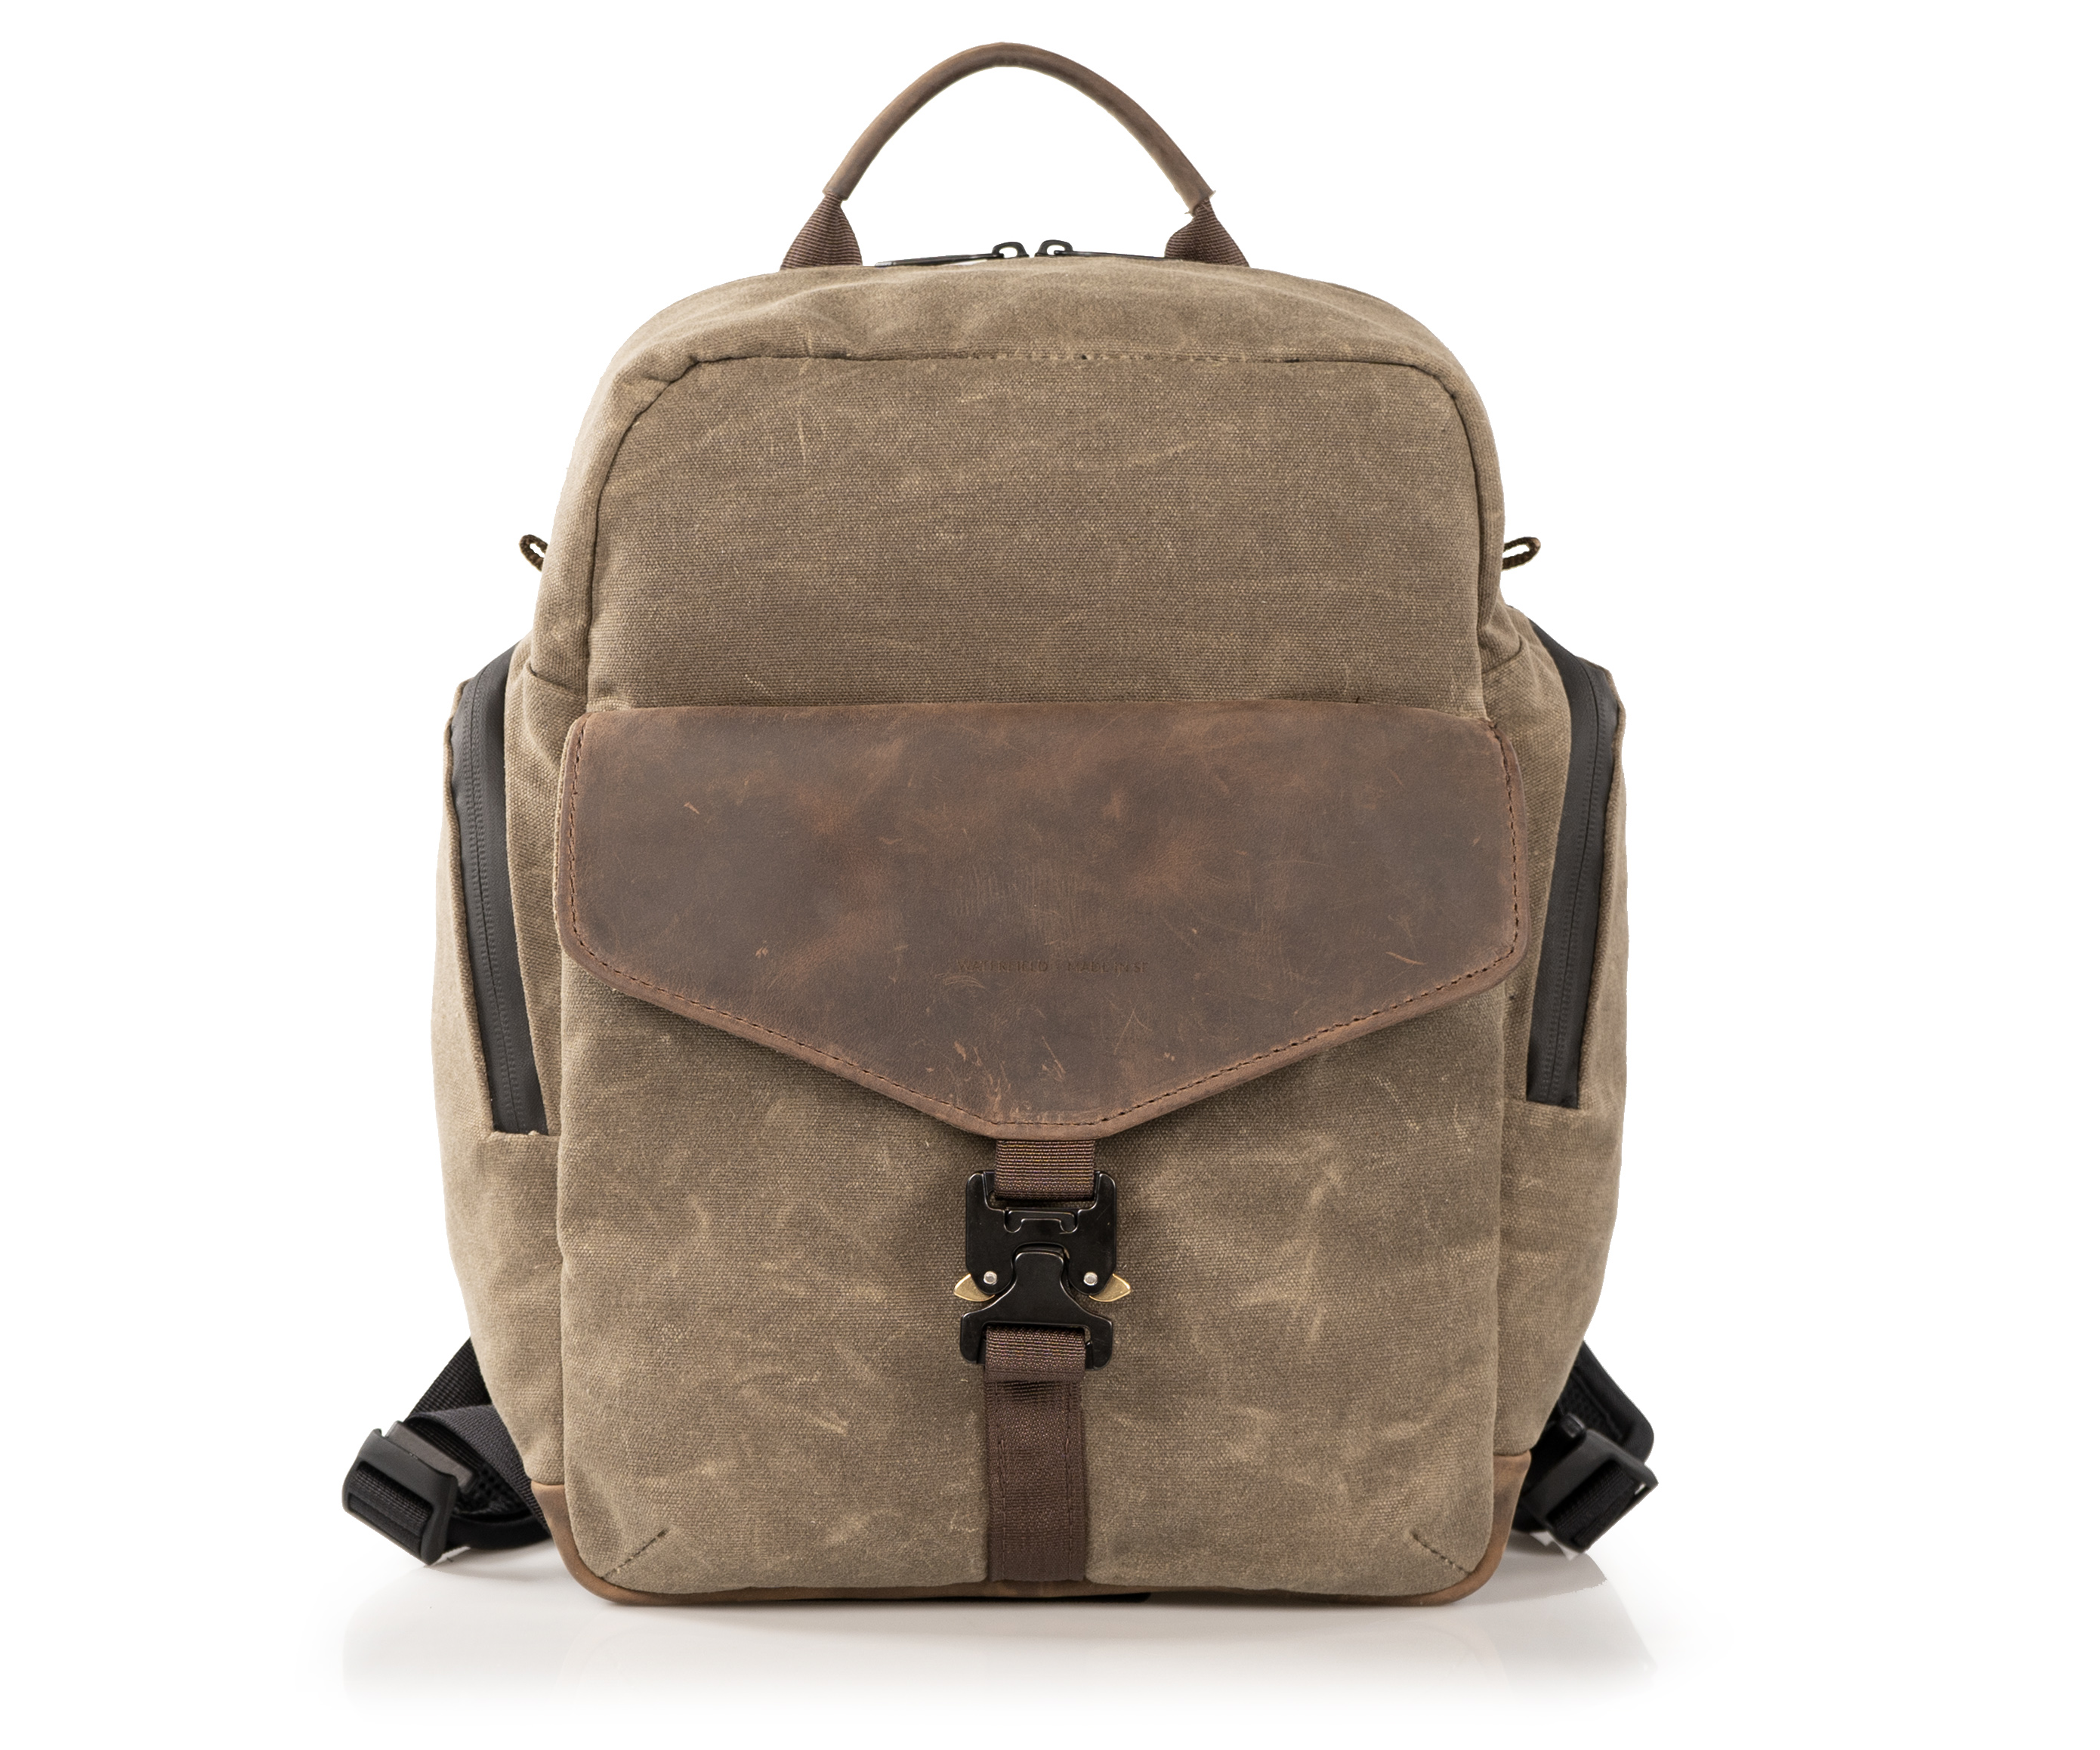 Field Backpack in waxed canvas and full-grain leather